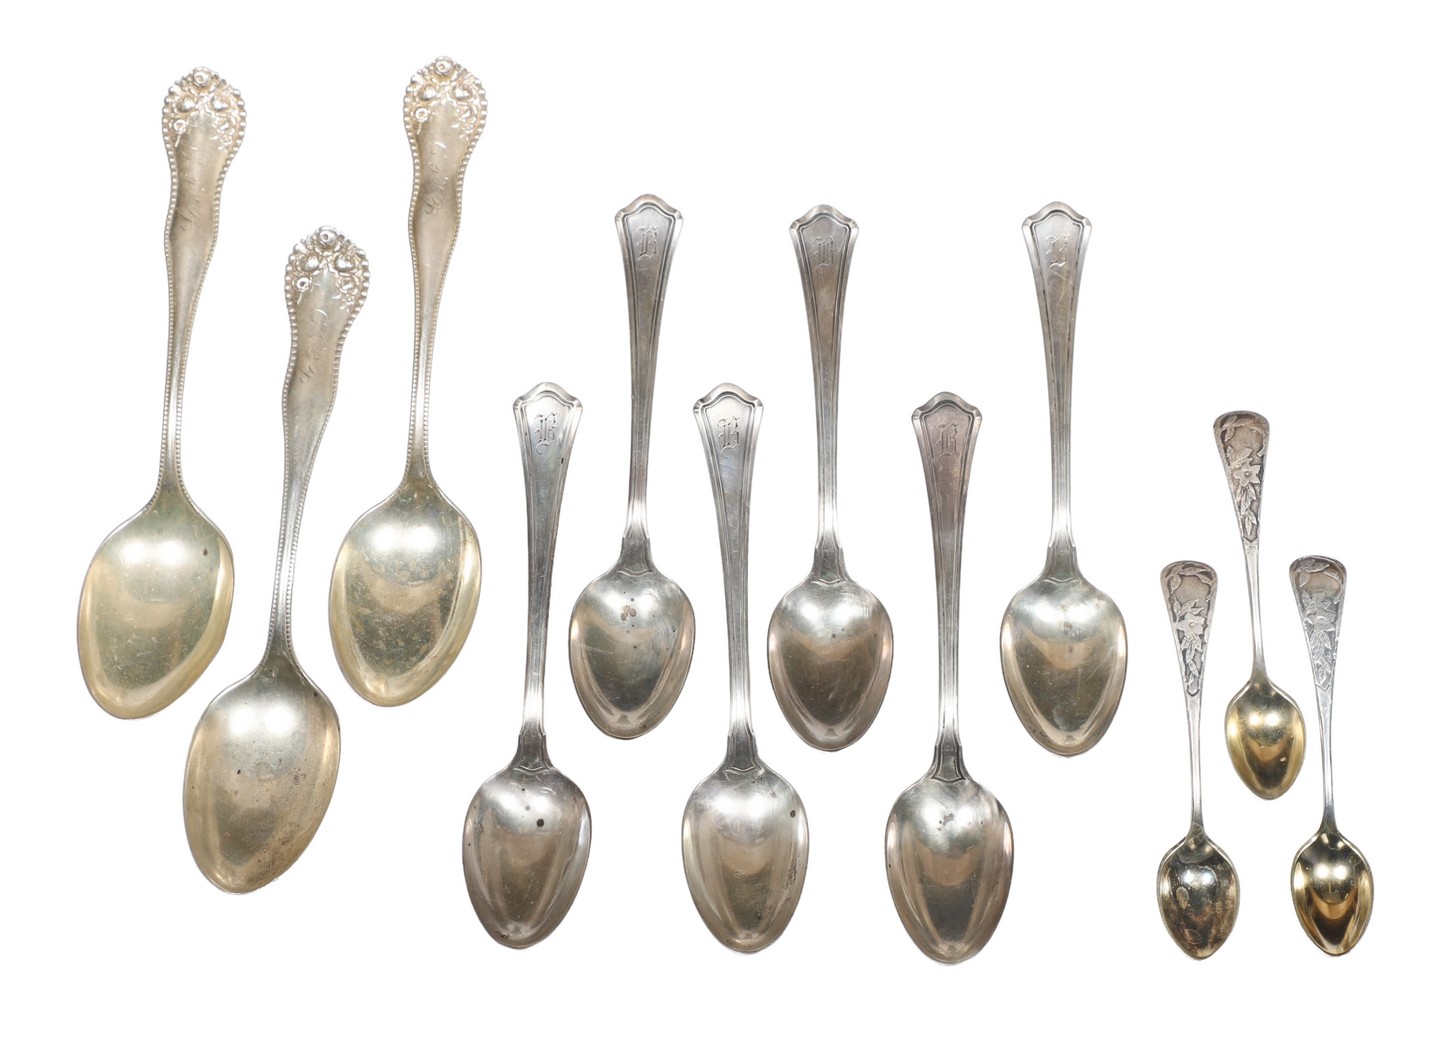 (12) Sterling silver spoons, 9.77